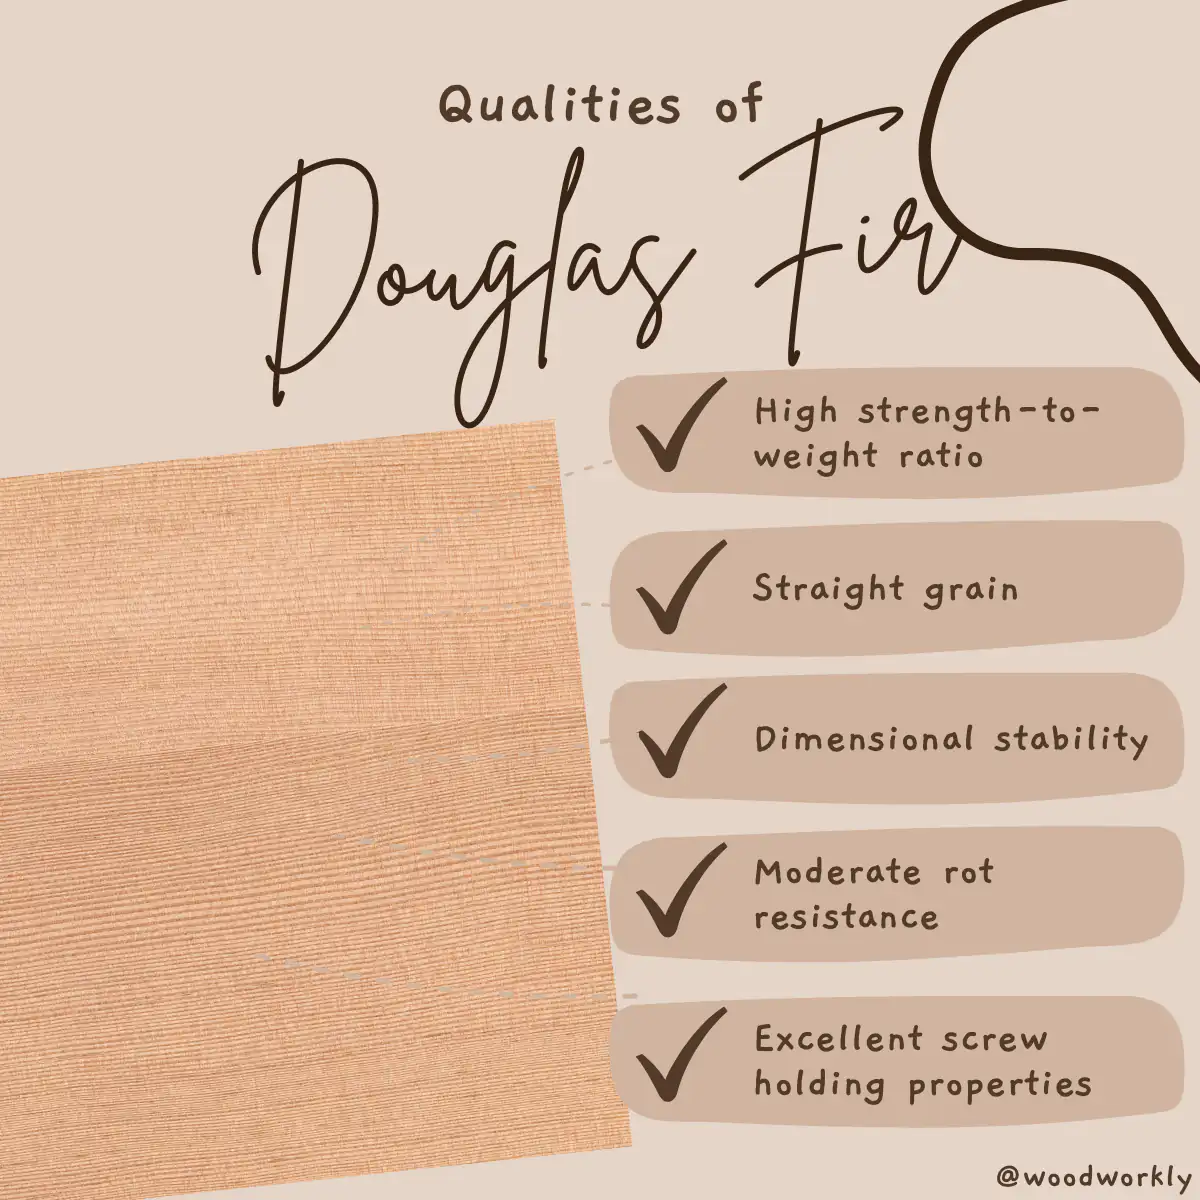 Qualities of Douglas Fir wood important when making a bed frame